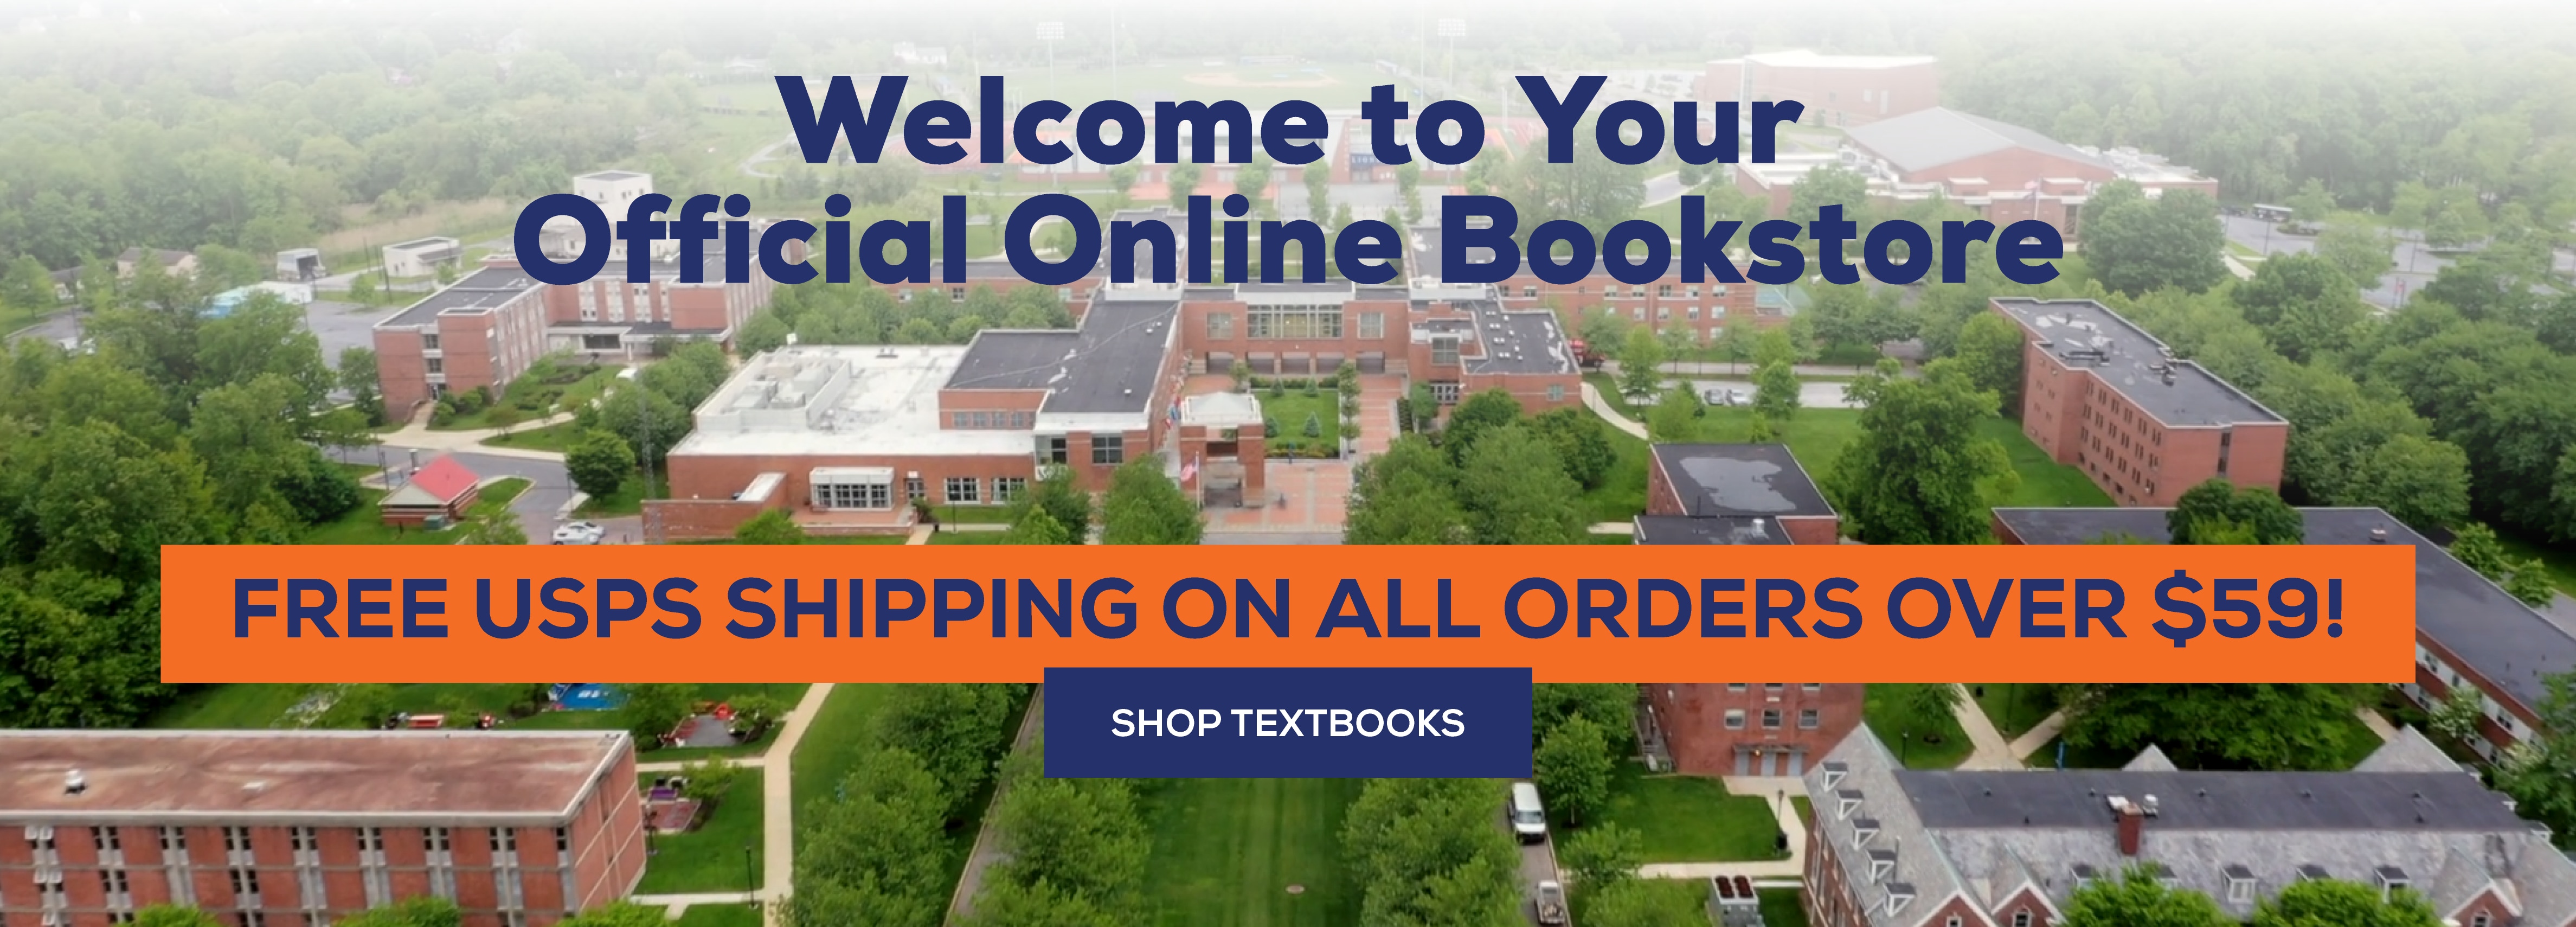 Welcome to your Official Online Bookstore! Free USPS shipping on all orders over $59! Shop Textbooks